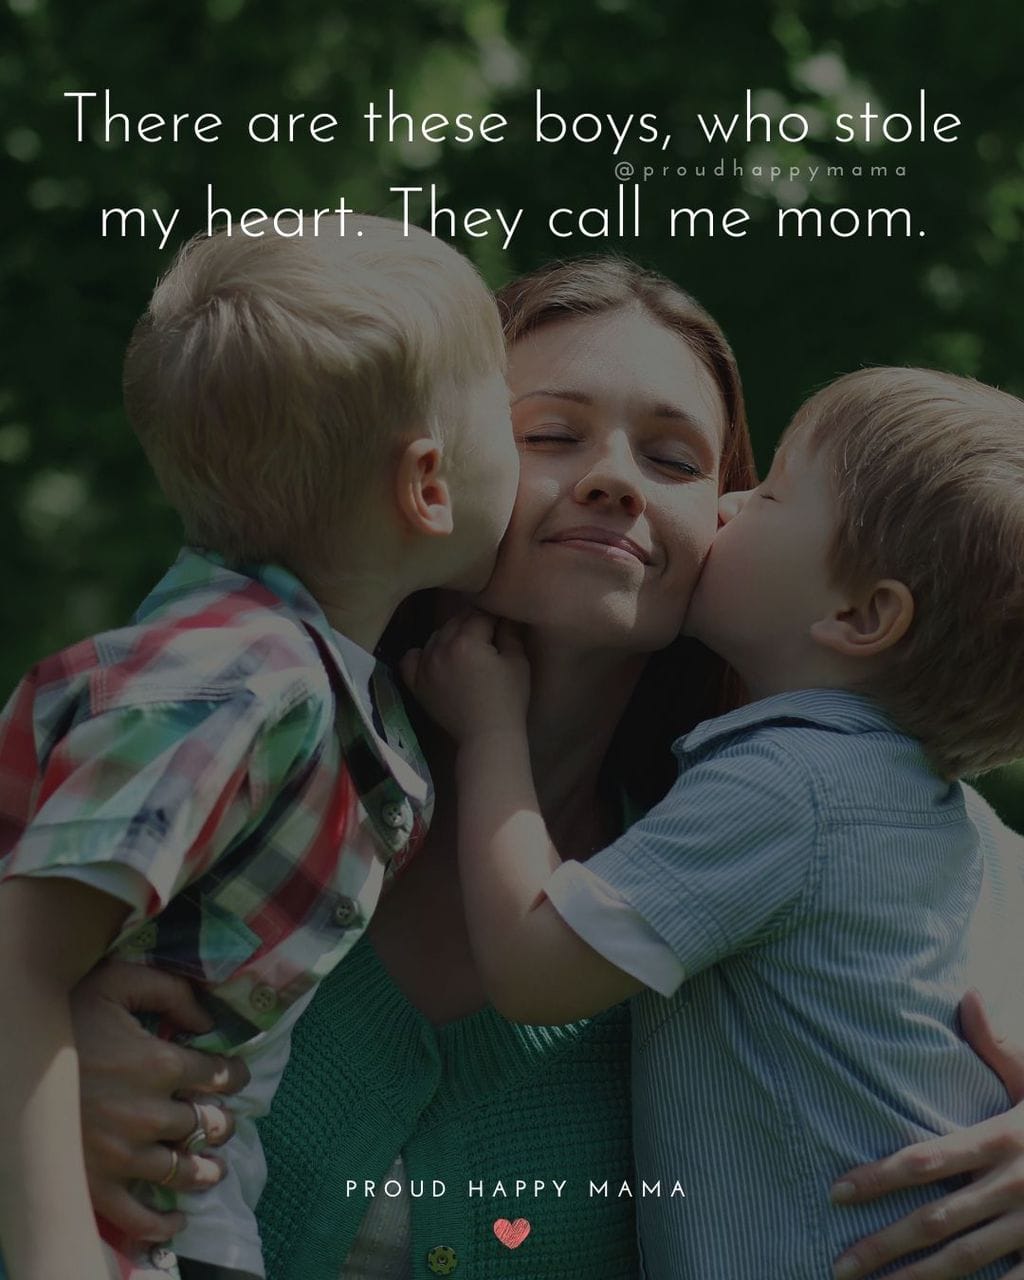 Boy Mom Quotes - There are these boys, who stole my heart. They call me mom.